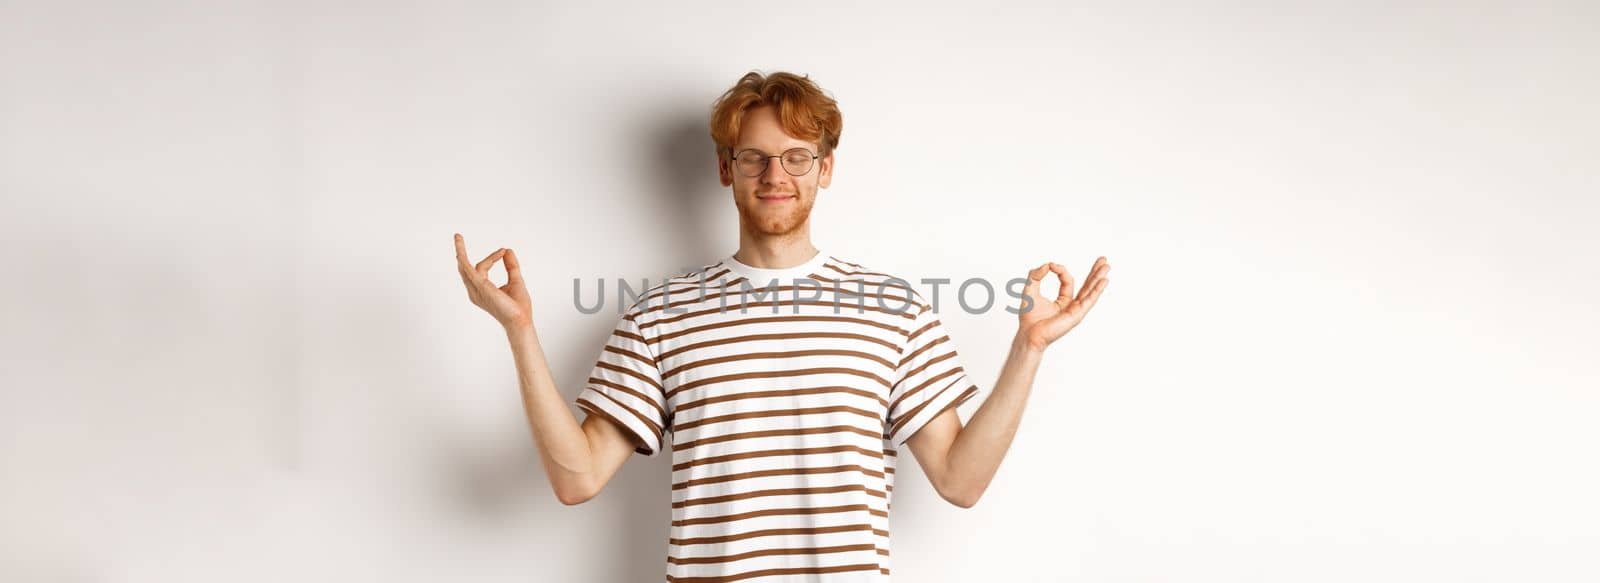 Calm and relaxed young man with red messy hair, spread hands sideways in mudra gesture and smiling, practice yoga or meditating, white background.